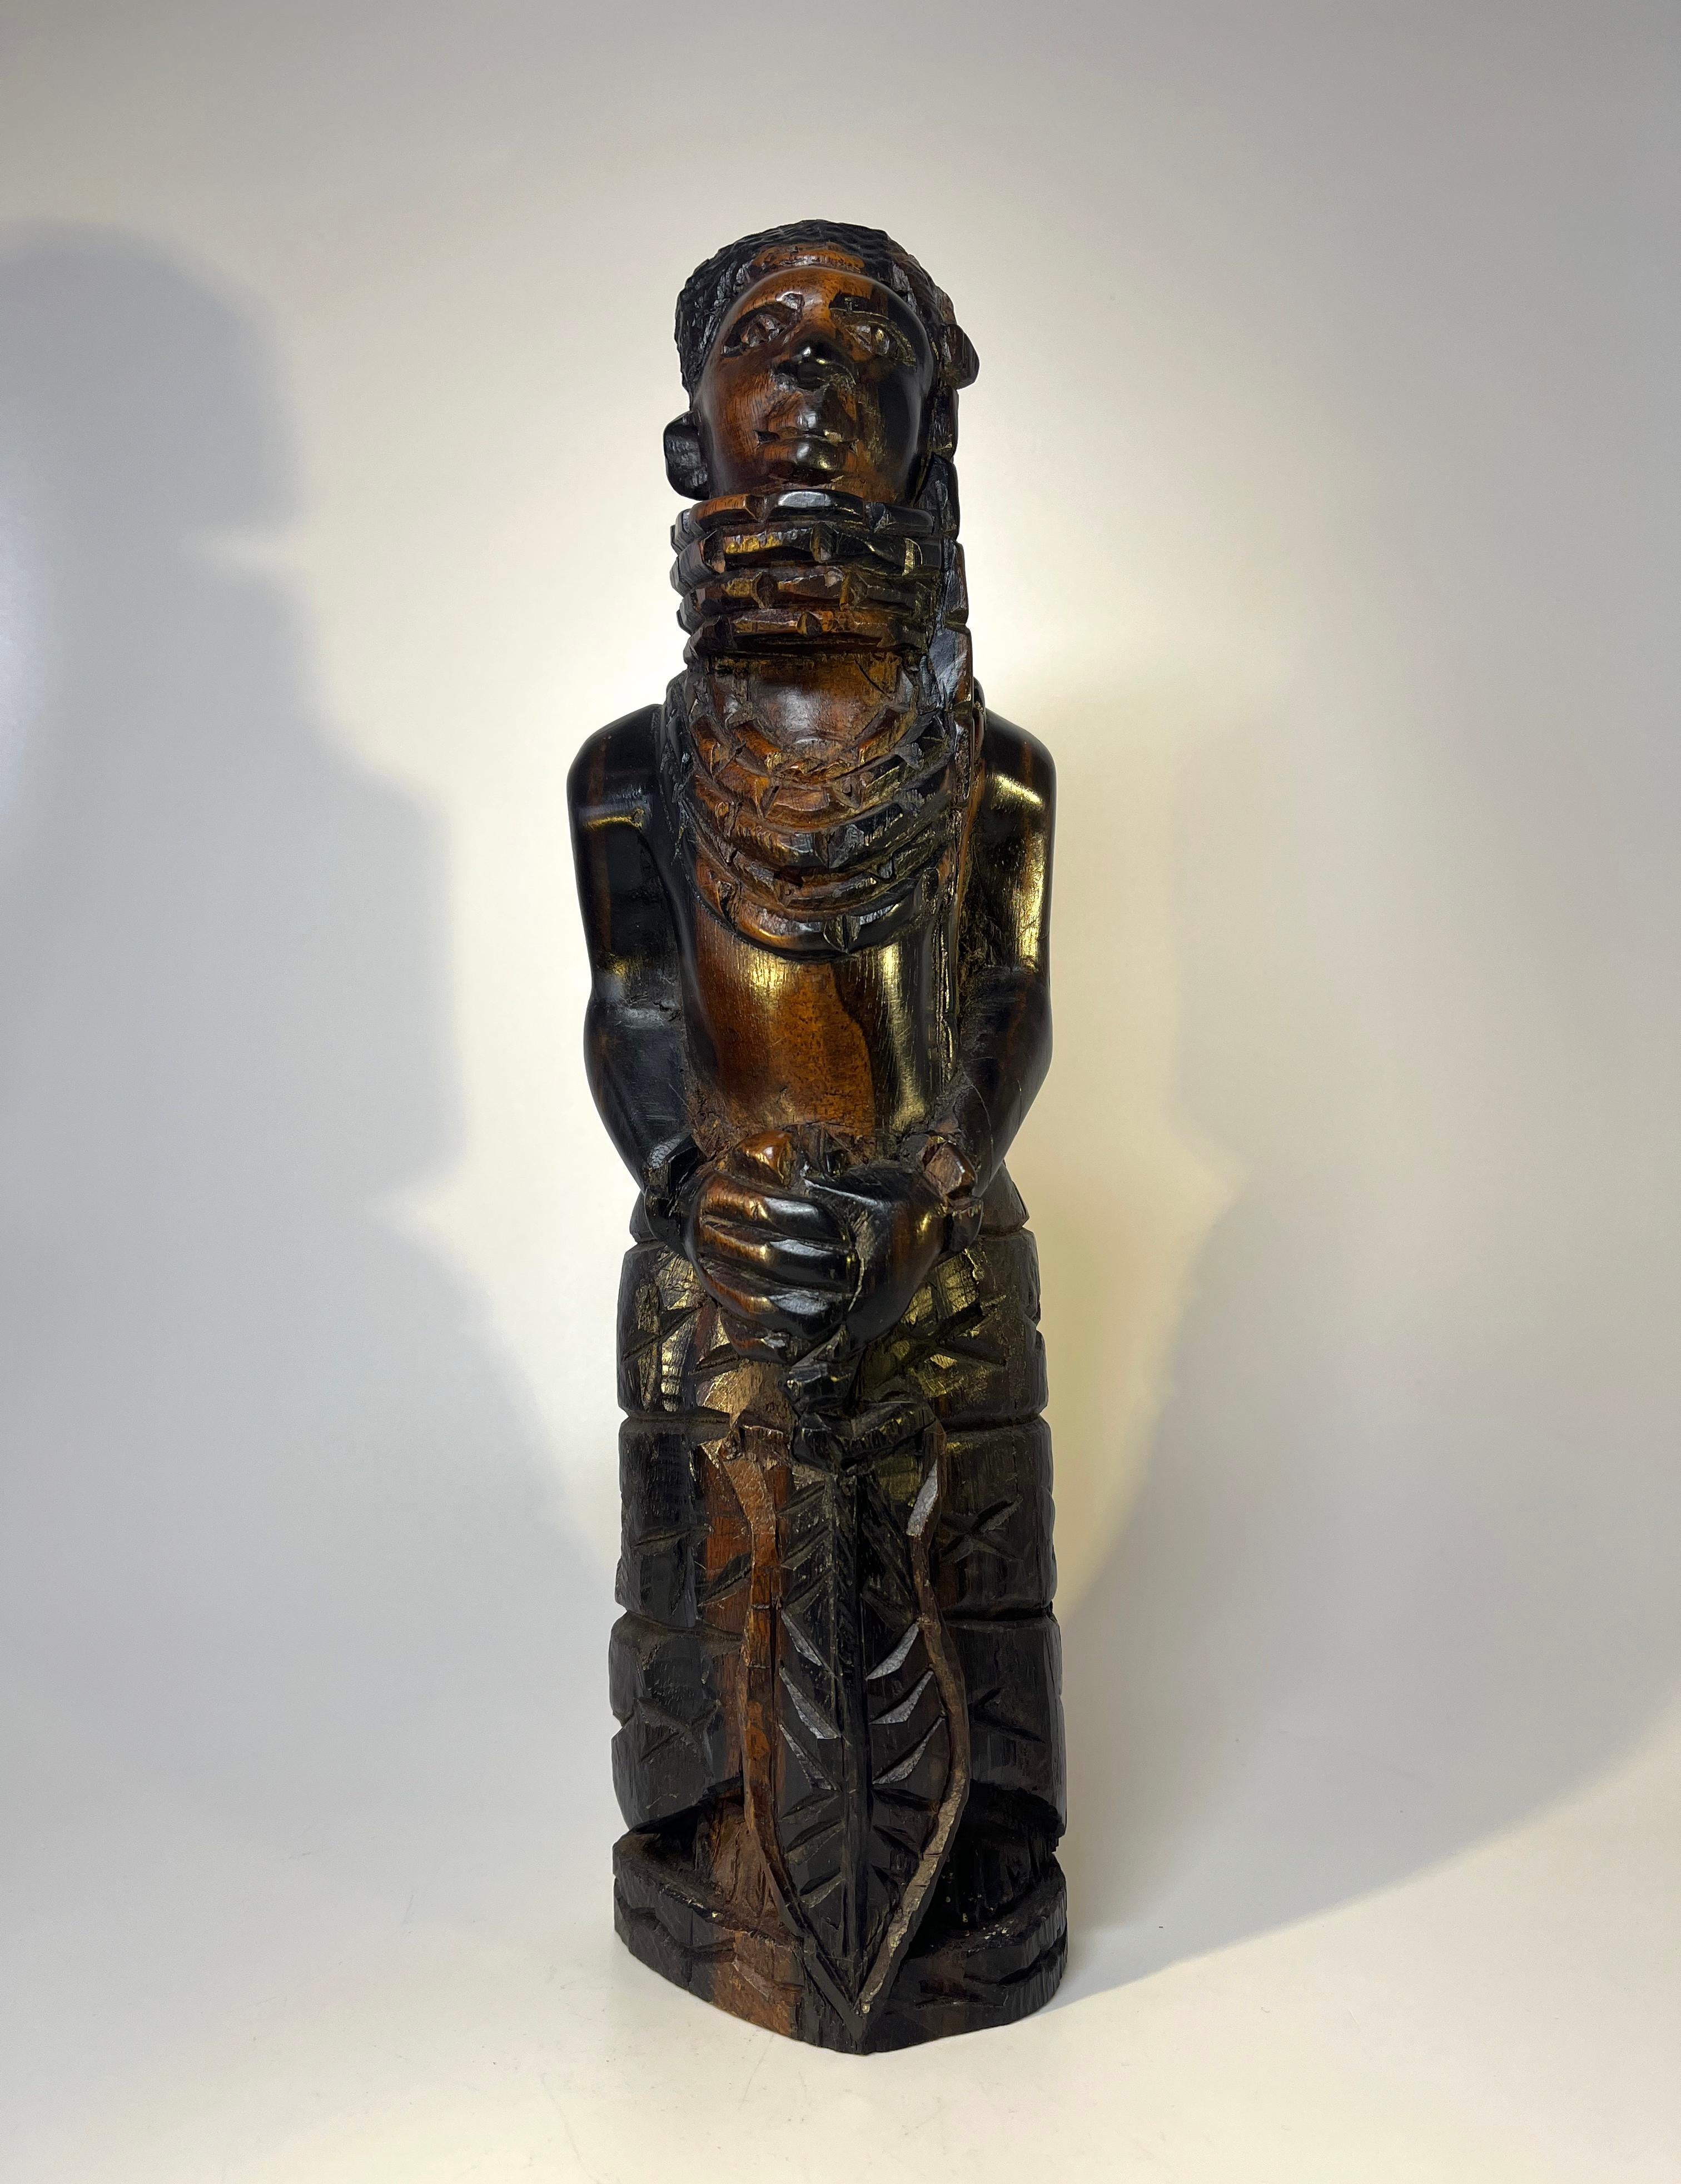 Wonderful hand carved ebony hardwood figure of a young Benin man, possibly a
future King Oba
Excellent traditional Benin artistic carving
A delightful piece
Circa 1970
Height 13 inch, Width 3.5 inch, Depth 2.5 inch
Very good condition.